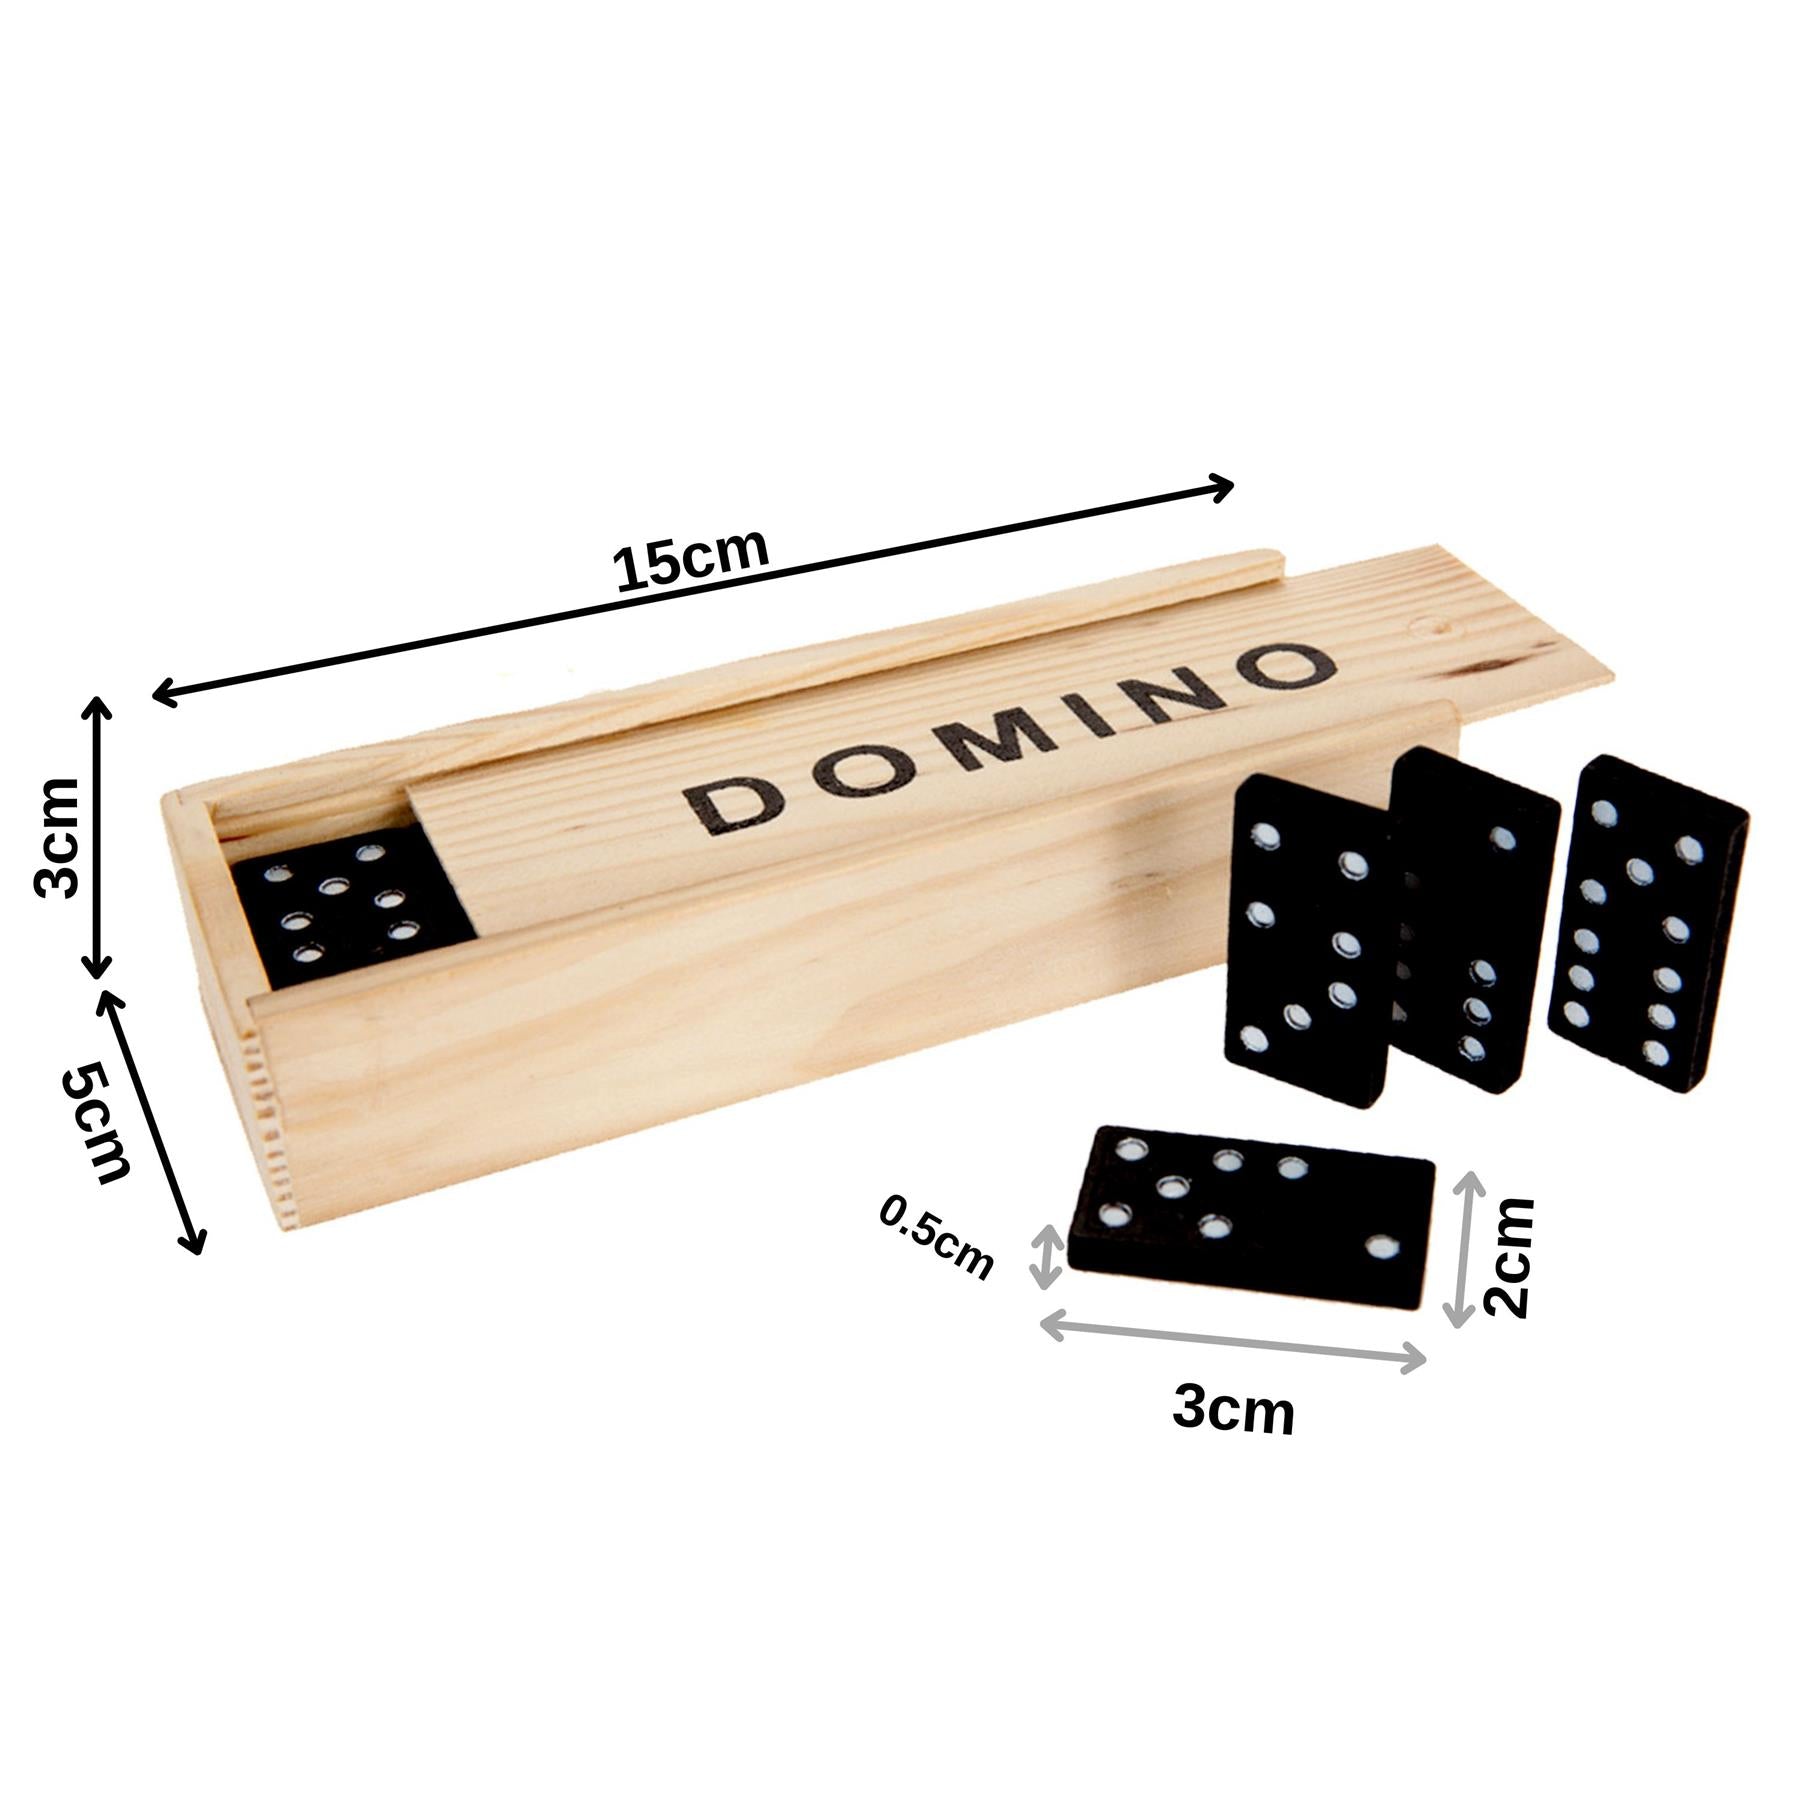 The Magic Toy Shop Dominoes Game Dominoes Game in Wooden Box